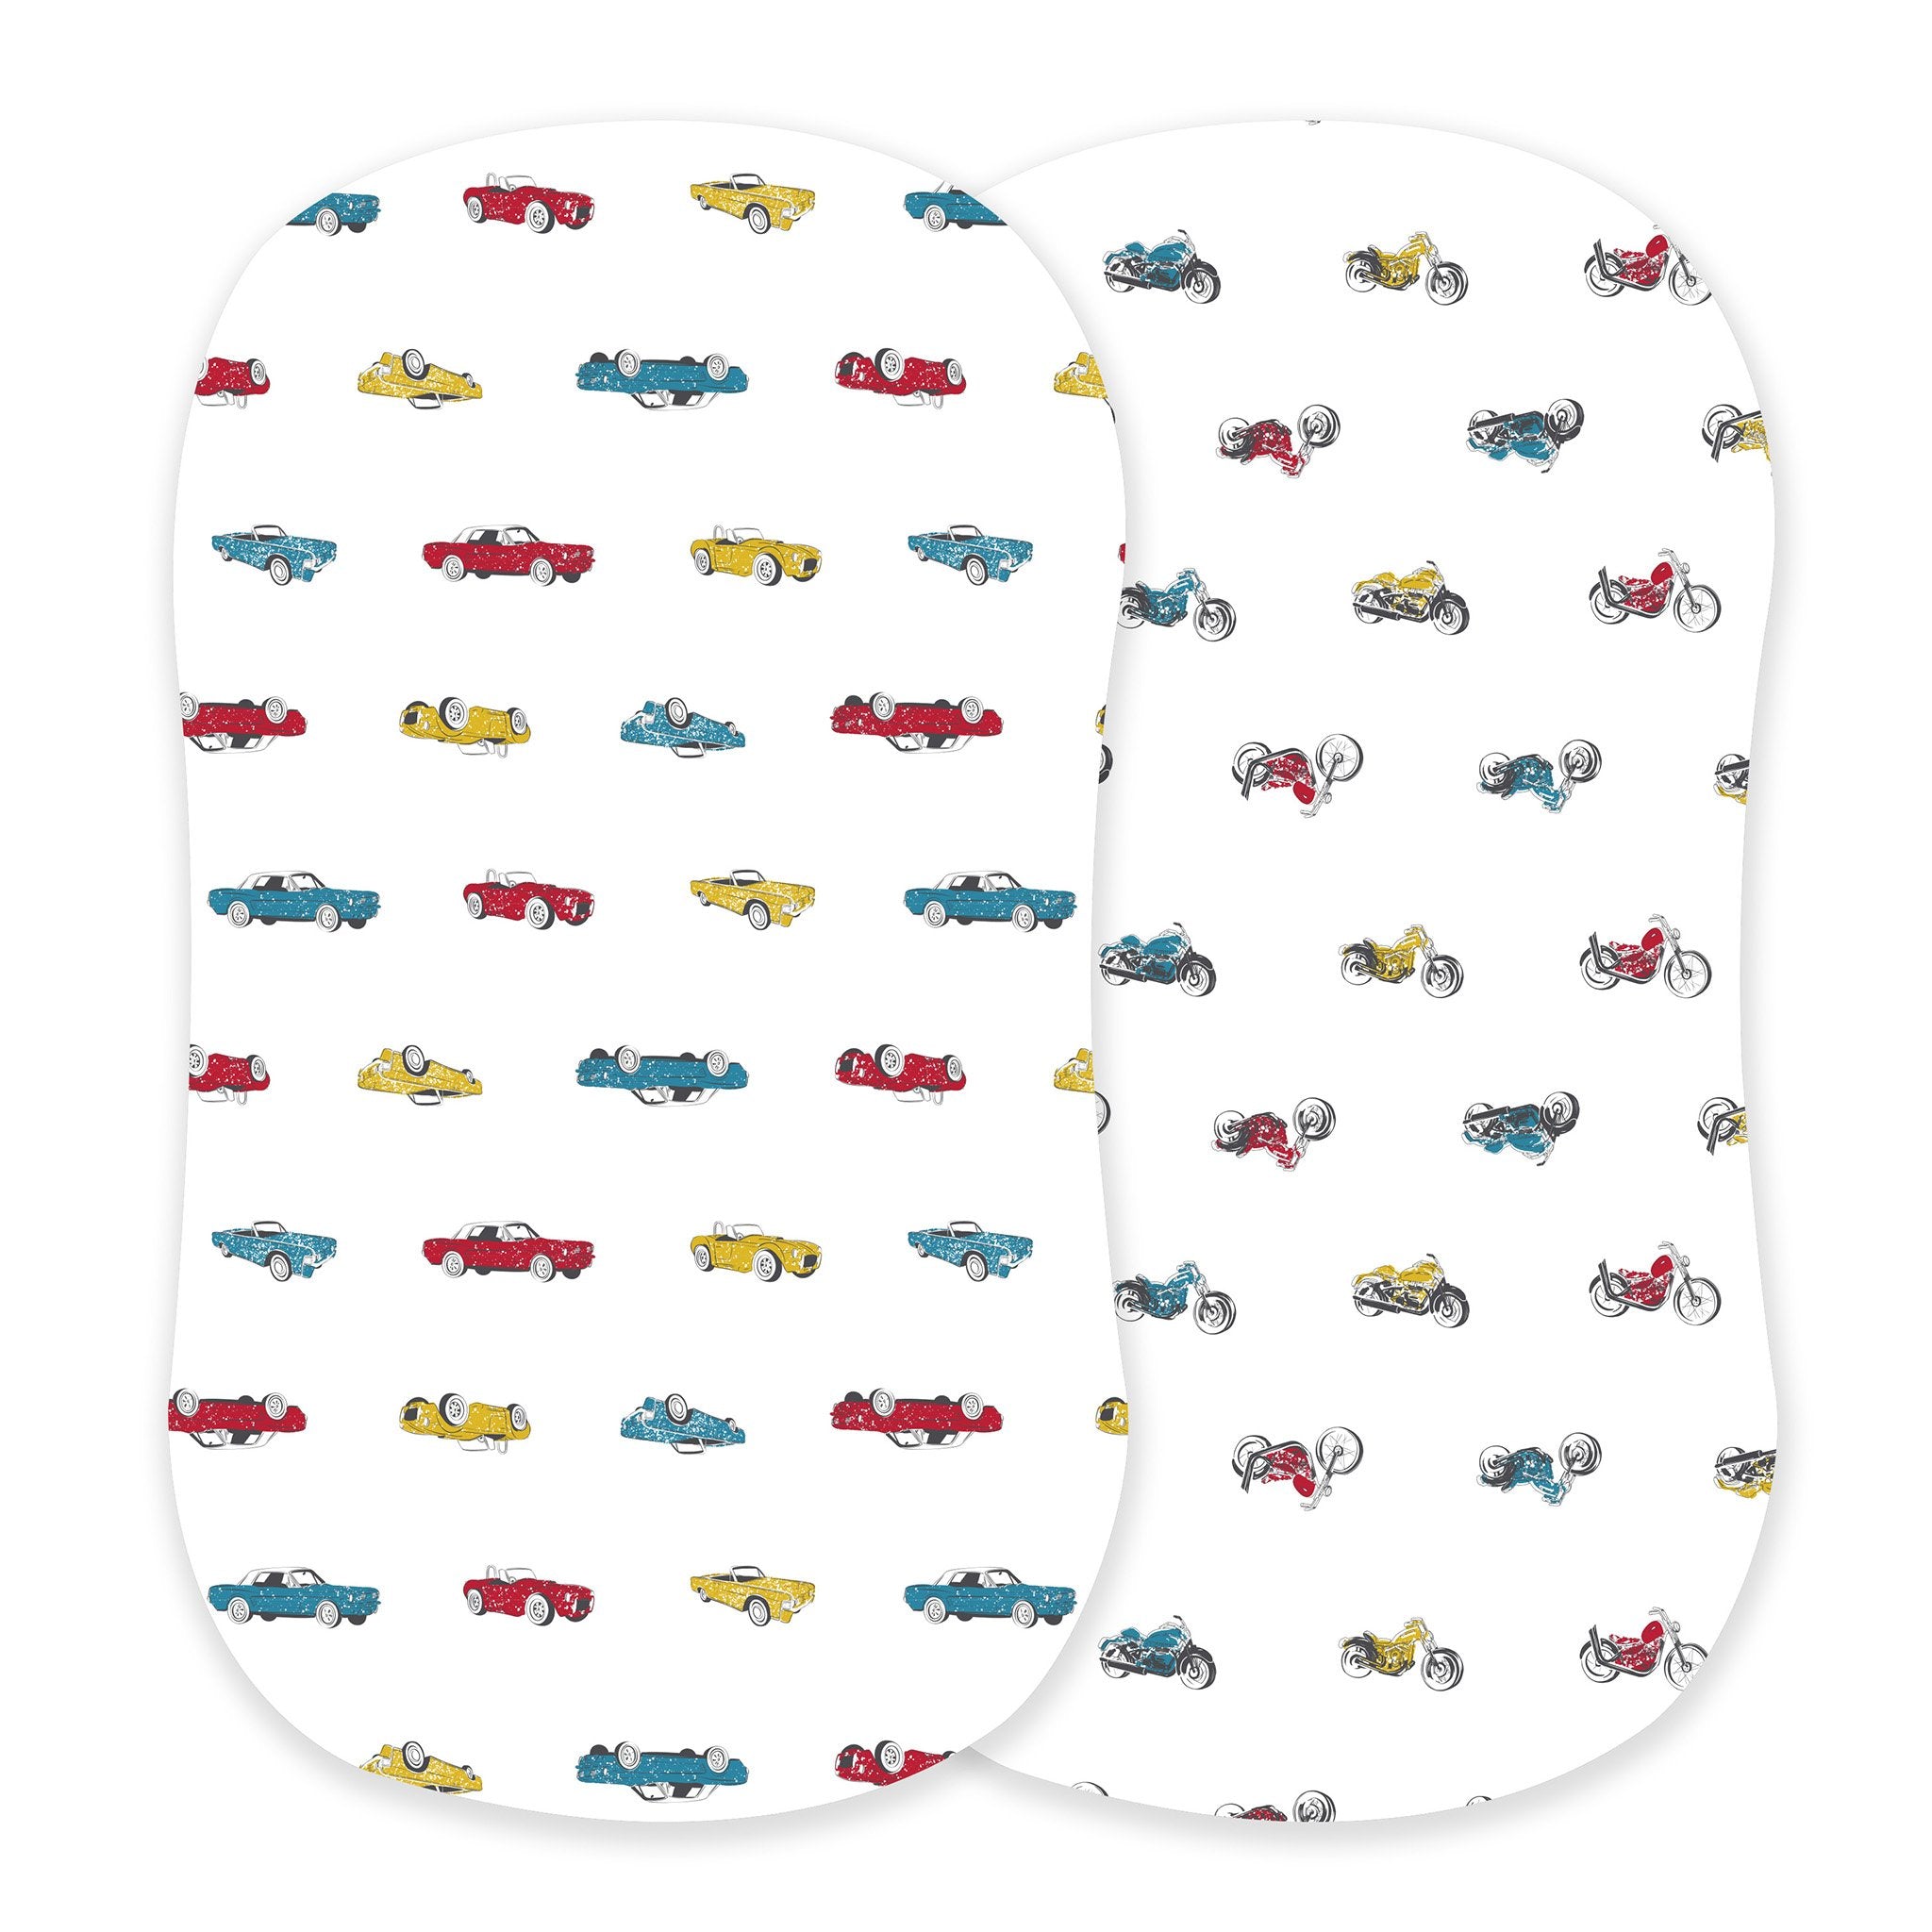 Vintage Muscle Cars and Vintage Motorcycles Bassinet Sheets - HoneyBug 